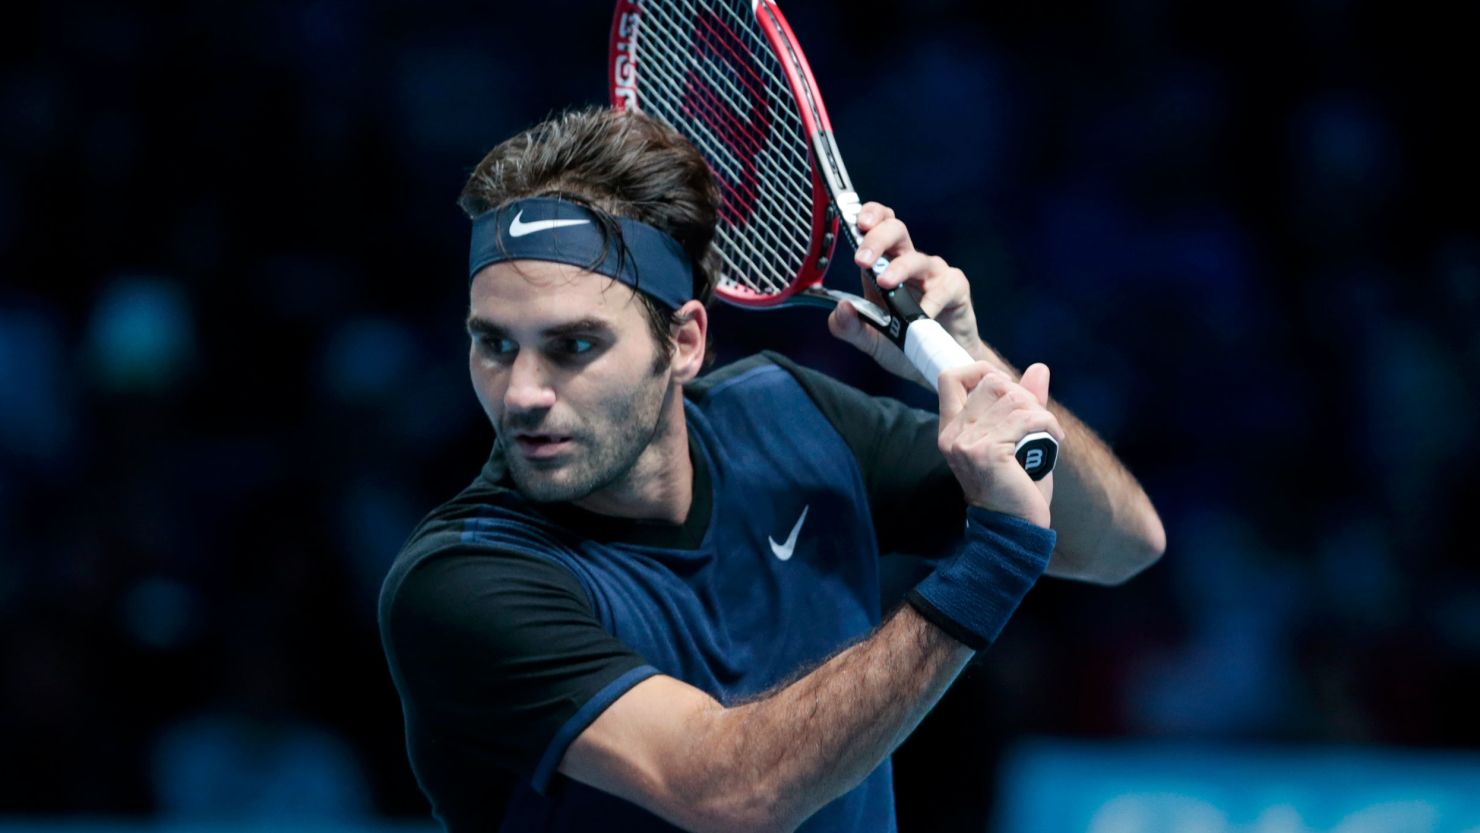 Letting Roger Federer leave Nike for Uniqlo was an 'atrocity